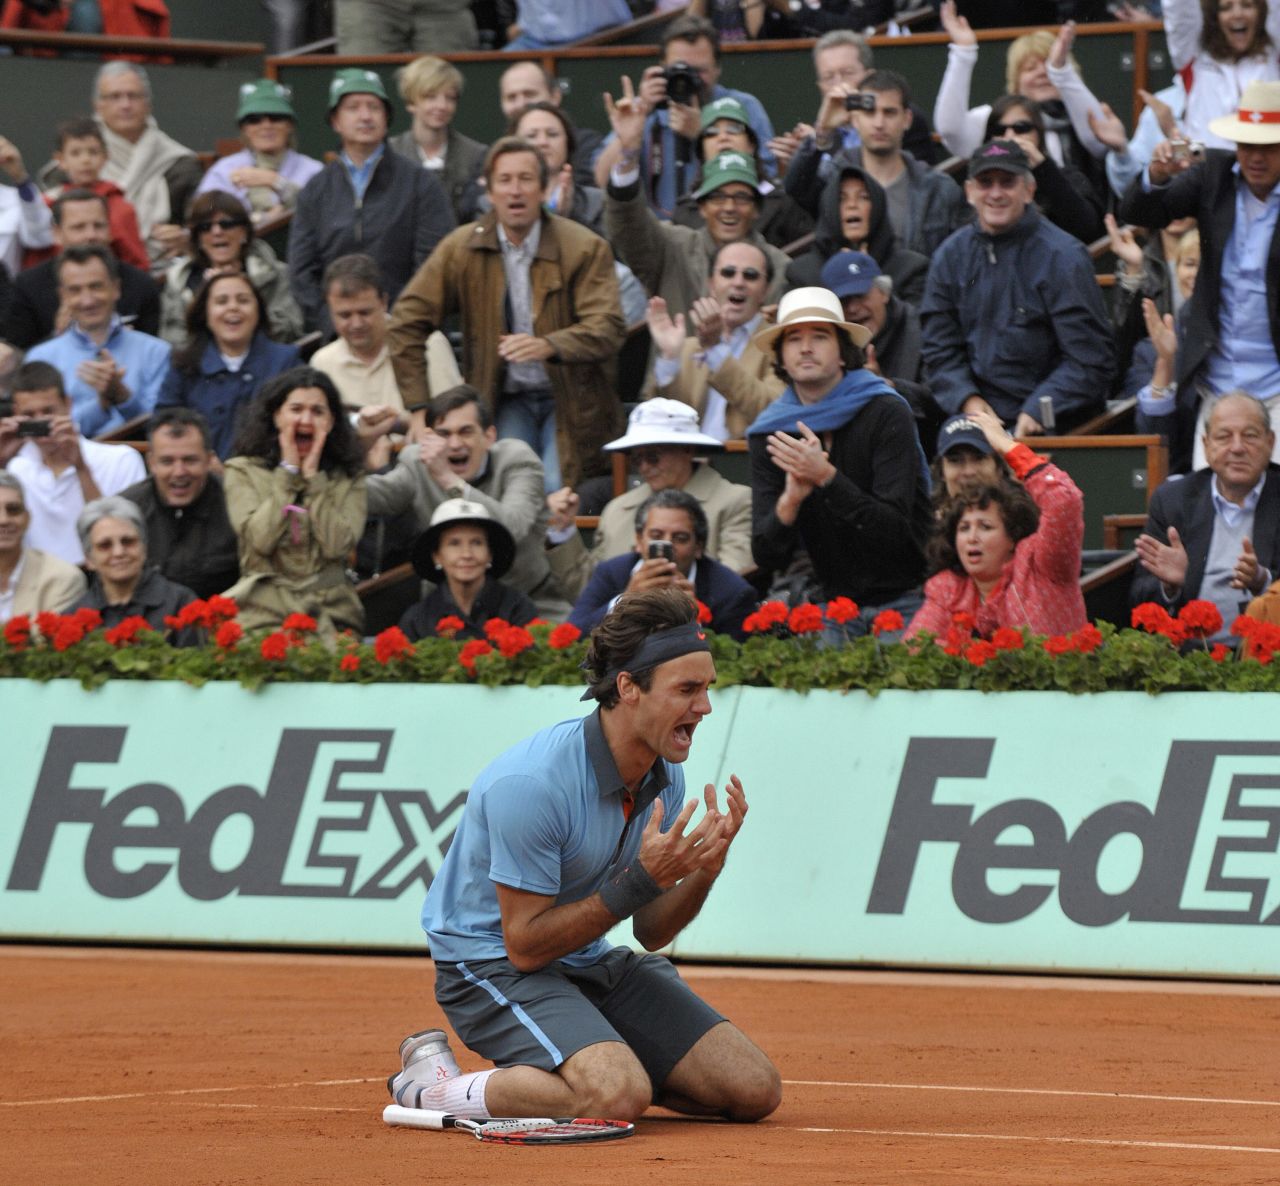 By 2009, despite all of his success, Federer was still to claim the French Open title. But after Robin Soderling eliminated Nadal in the fourth round, Federer beat the Swede in the final to complete a career grand slam.